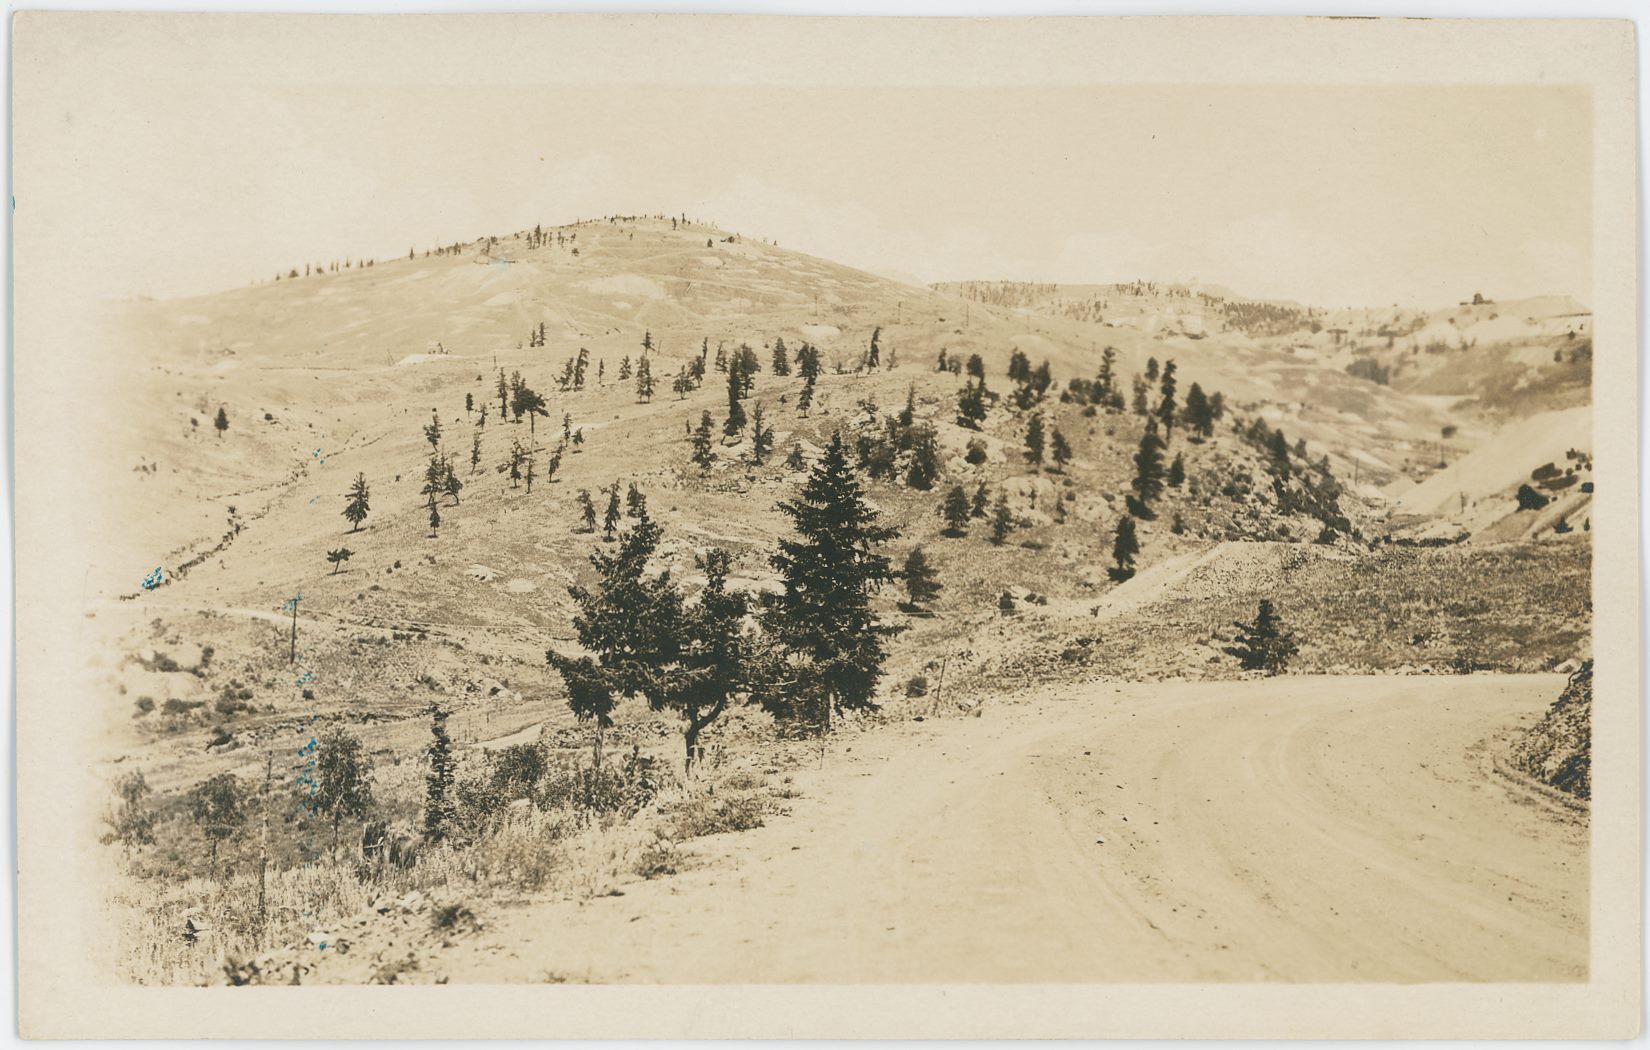 I am pretty certain this is on the former main road between Victor (behind and to the right) & Cripple Creek (into image towards left) where it went over the hills and valleys at a lower elevation then the railroads. I further believe this is as the road turn down into Eclipse Gulch, and that the valley up on the right-hand side is the Eclipse Gulch.
* The dump seen about 1/3 down from the top sticking into the view from right-hand edge would be the huge dump left after the Economic Mill burned down, at least that is what I think the dump is.
* Near the same edge, against the sky, the Blue Bird Mine can be seen as a darker spot, while the American Eagle is almost faded into the sky further to the left, about 1/4 in from right-hand side.
* The Shaft House of the old Bostwick Mine can be seen about 1/3 down from top and about 2/7 in from left-hand side.